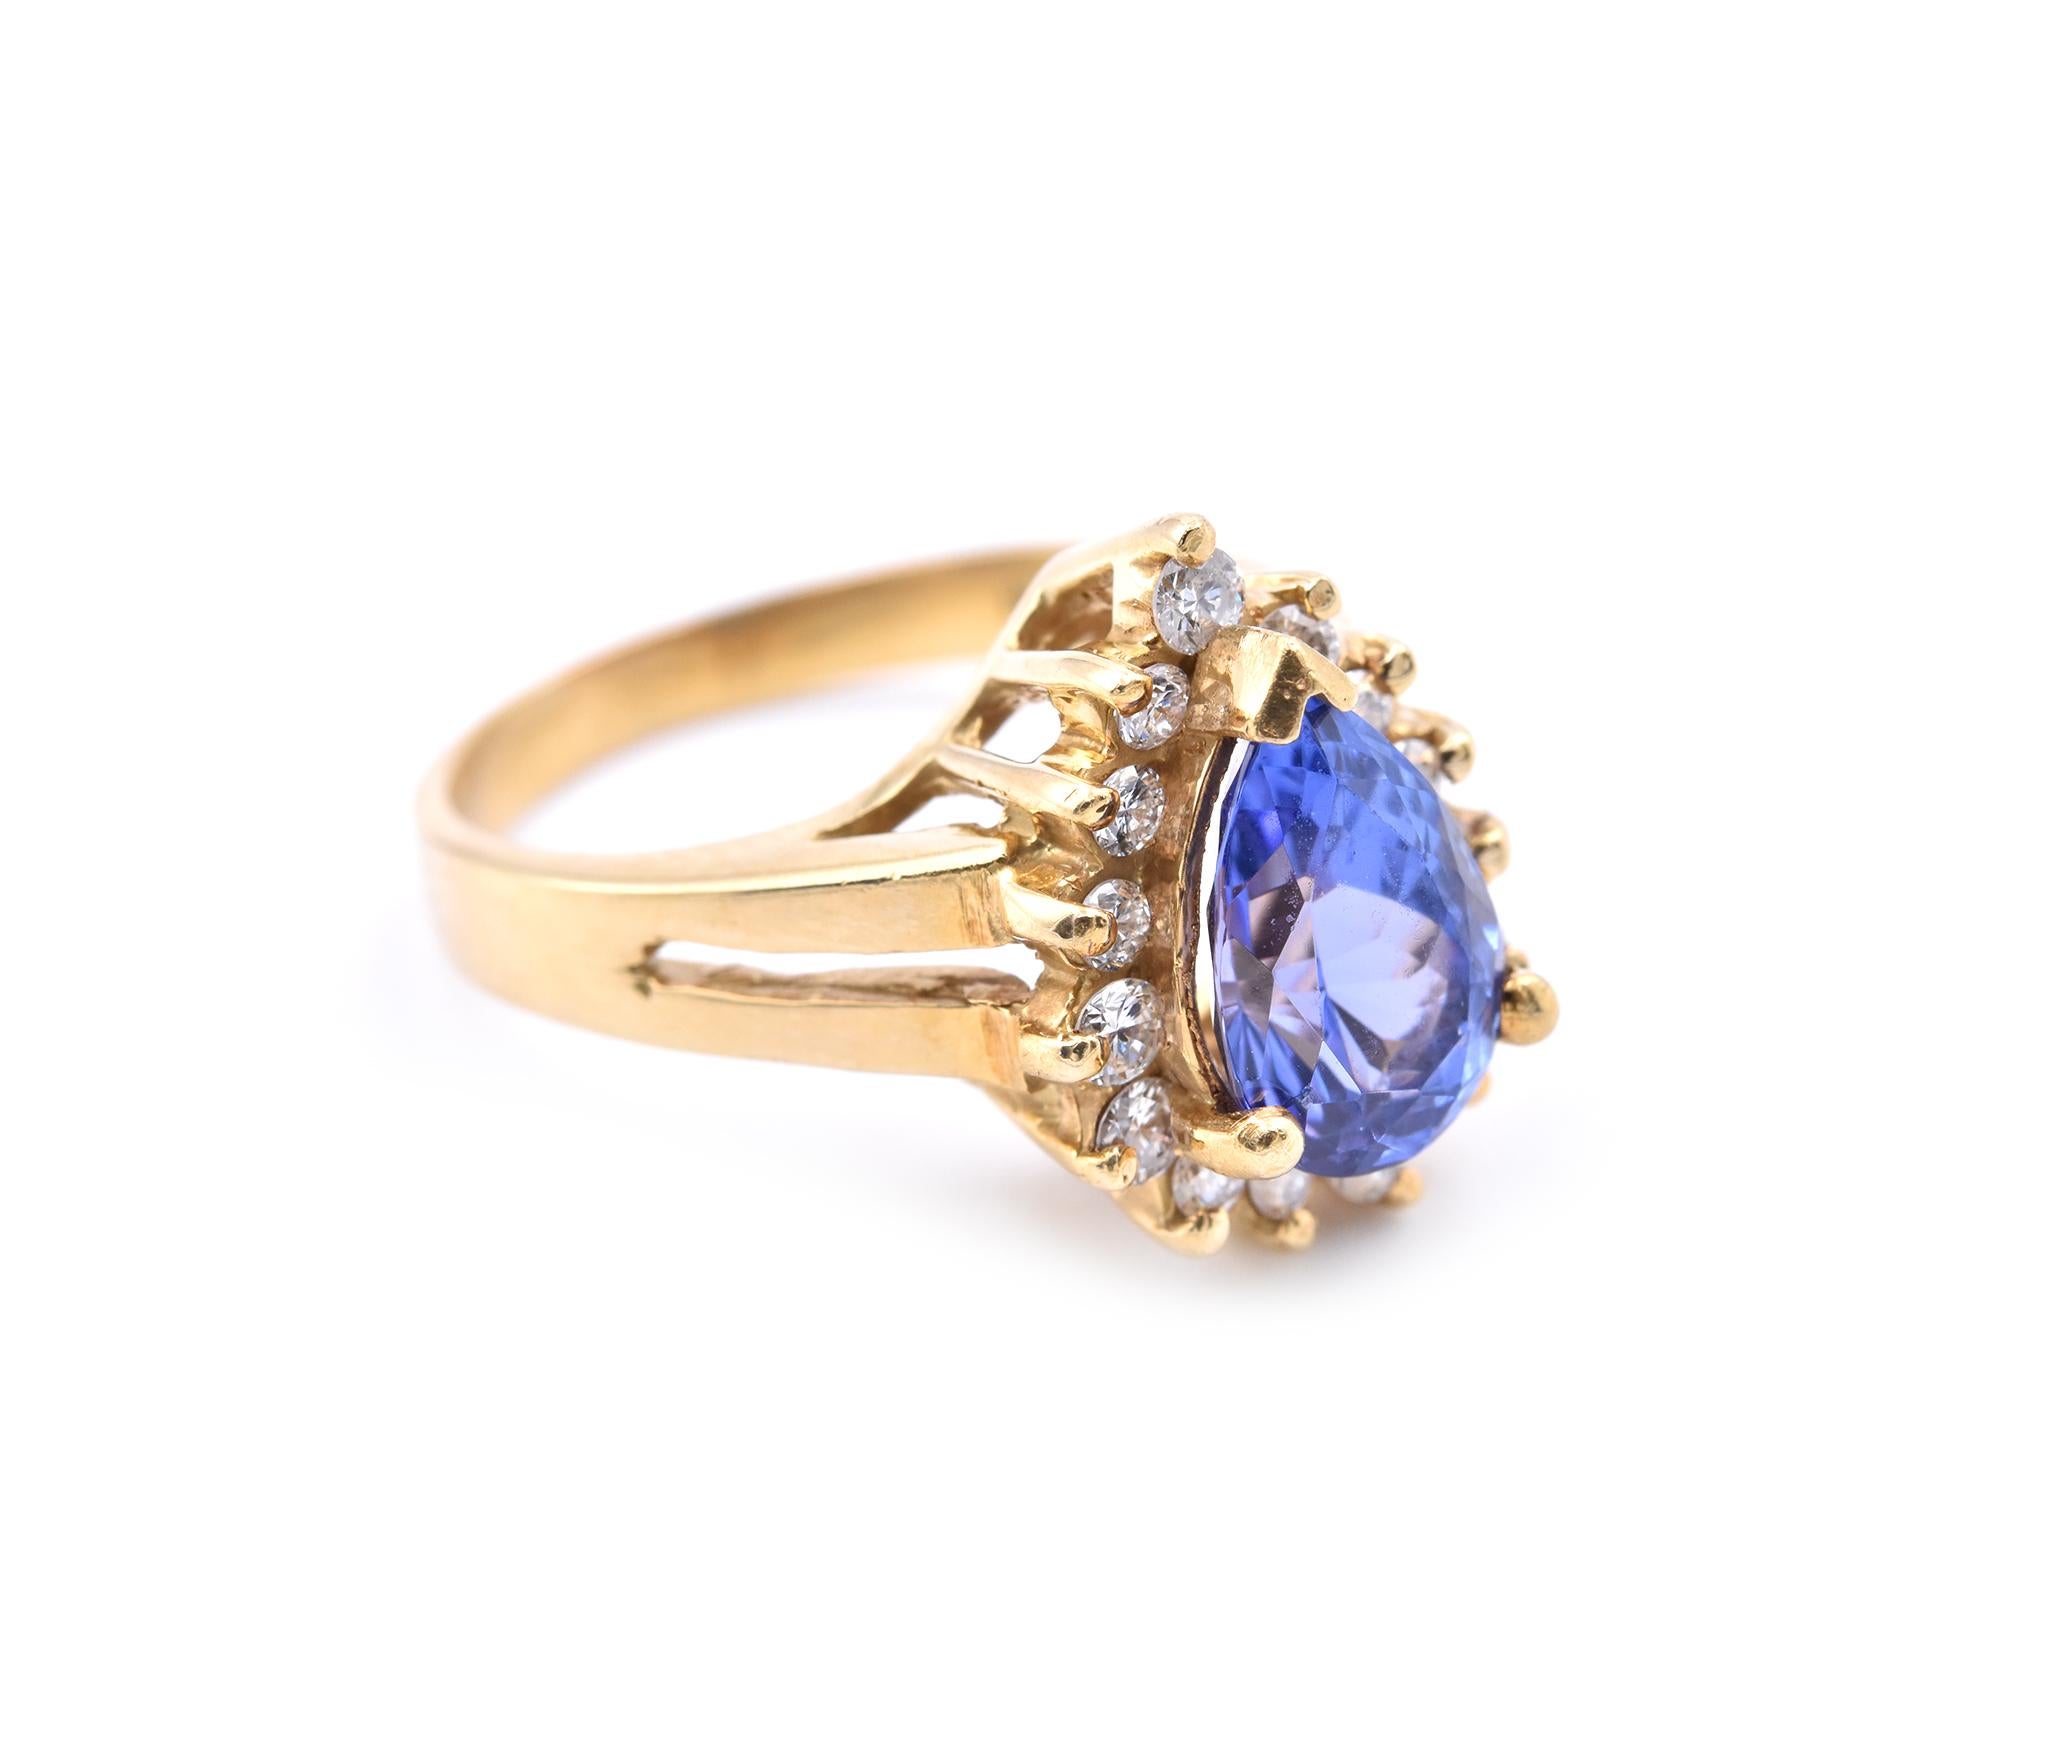 Material: 18k yellow gold
Gemstone: 1 pear cut tanzanite = 2.25ct
Diamonds: 15 round brilliant cuts = 0.45cttw
Color: H
Clarity: SI2
Ring Size: 6 (please allow two additional shipping days for sizing requests)
Dimensions: ring top measures 15mm x